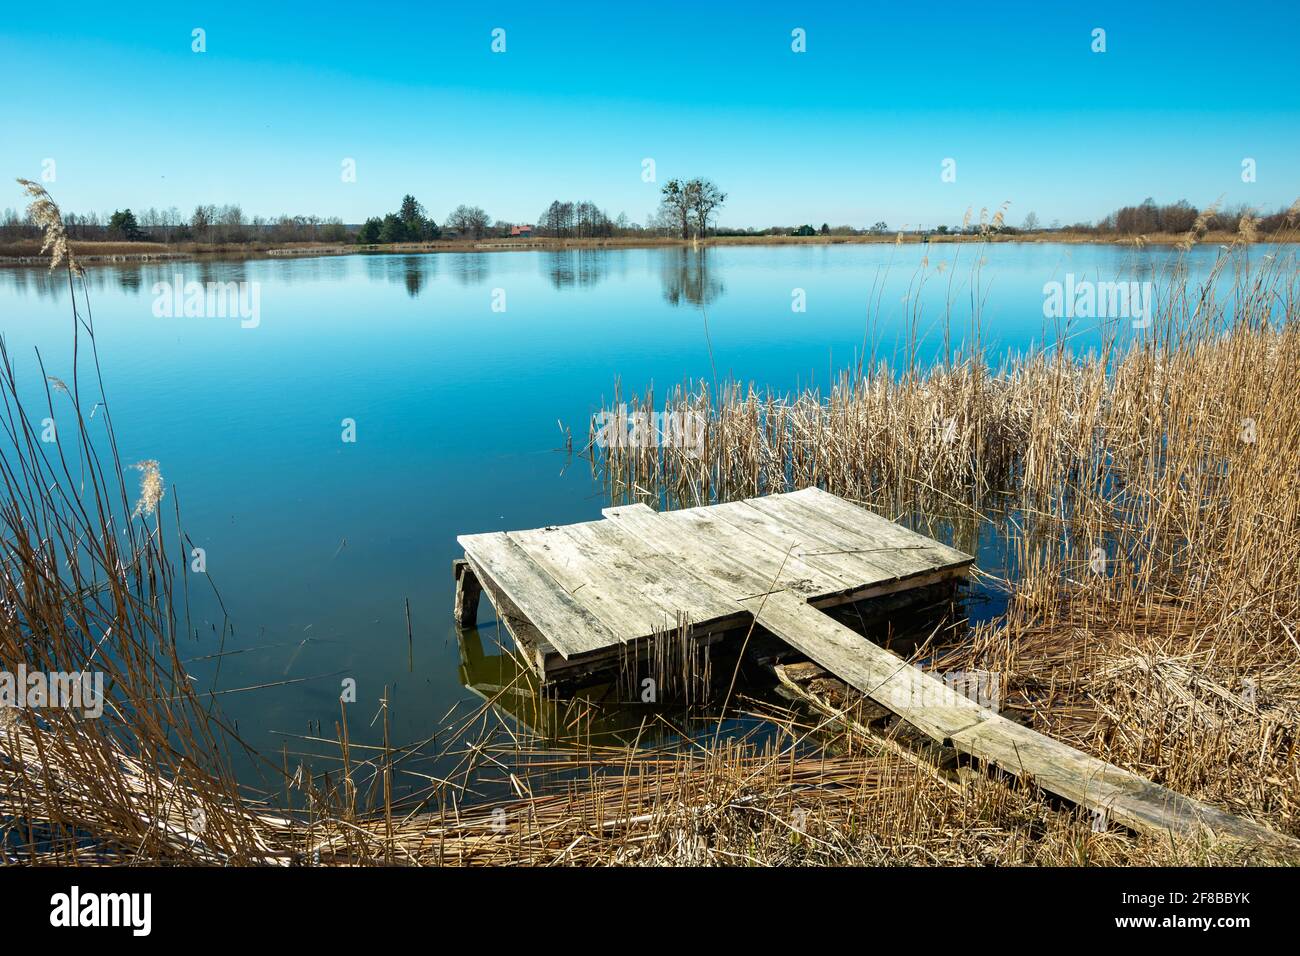 Wooden fishing pier, dry reeds and a beautiful blue lake Stock Photo